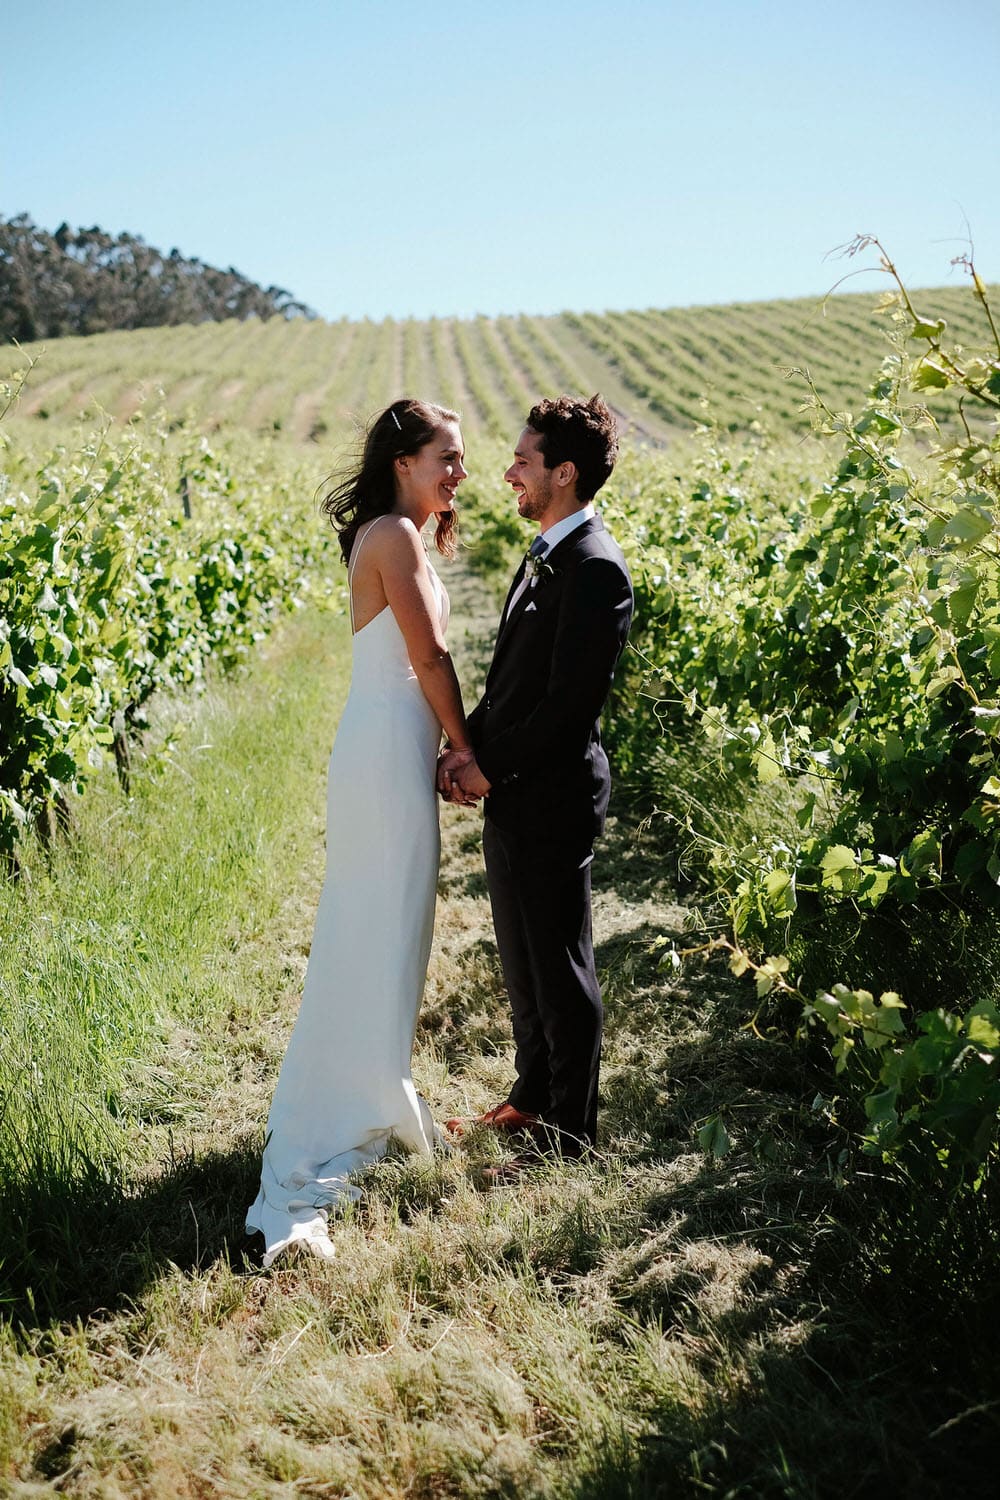 Candid portrait of the couple looking at each other in the vineyard of the quinta da bichinha